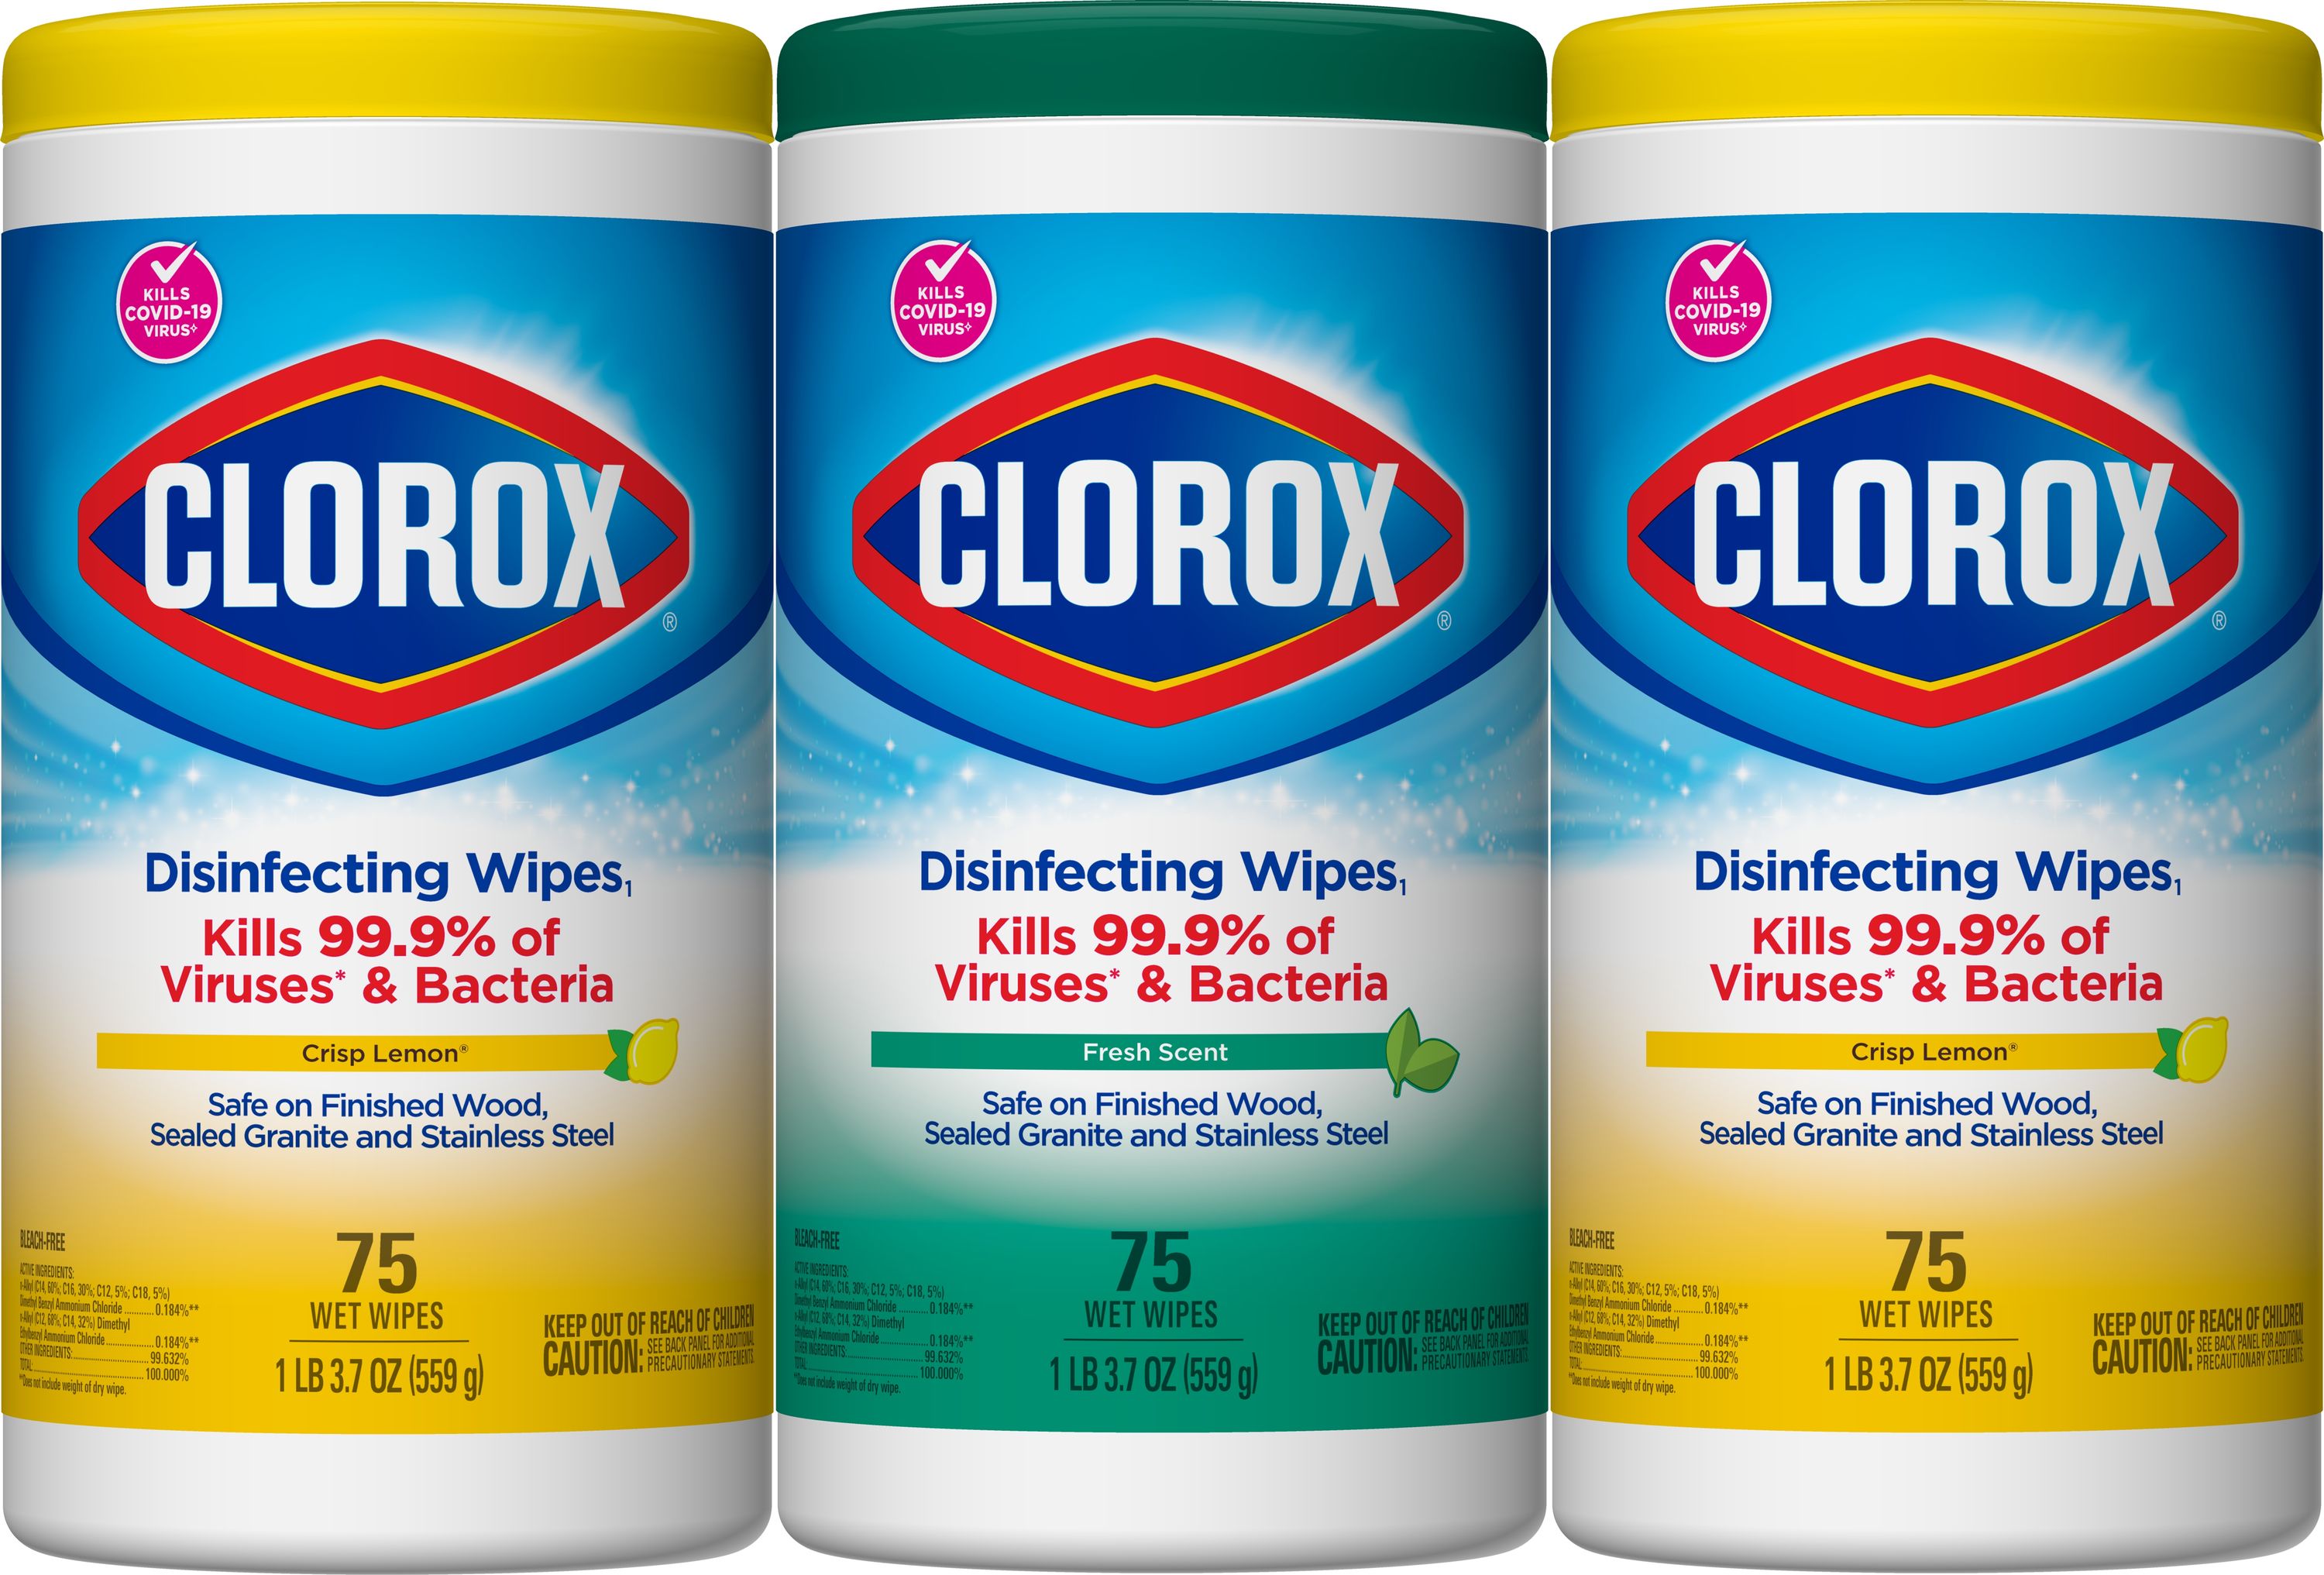 NEW Clorox Products = as low as $0.09 Dust Wipes at Kroger